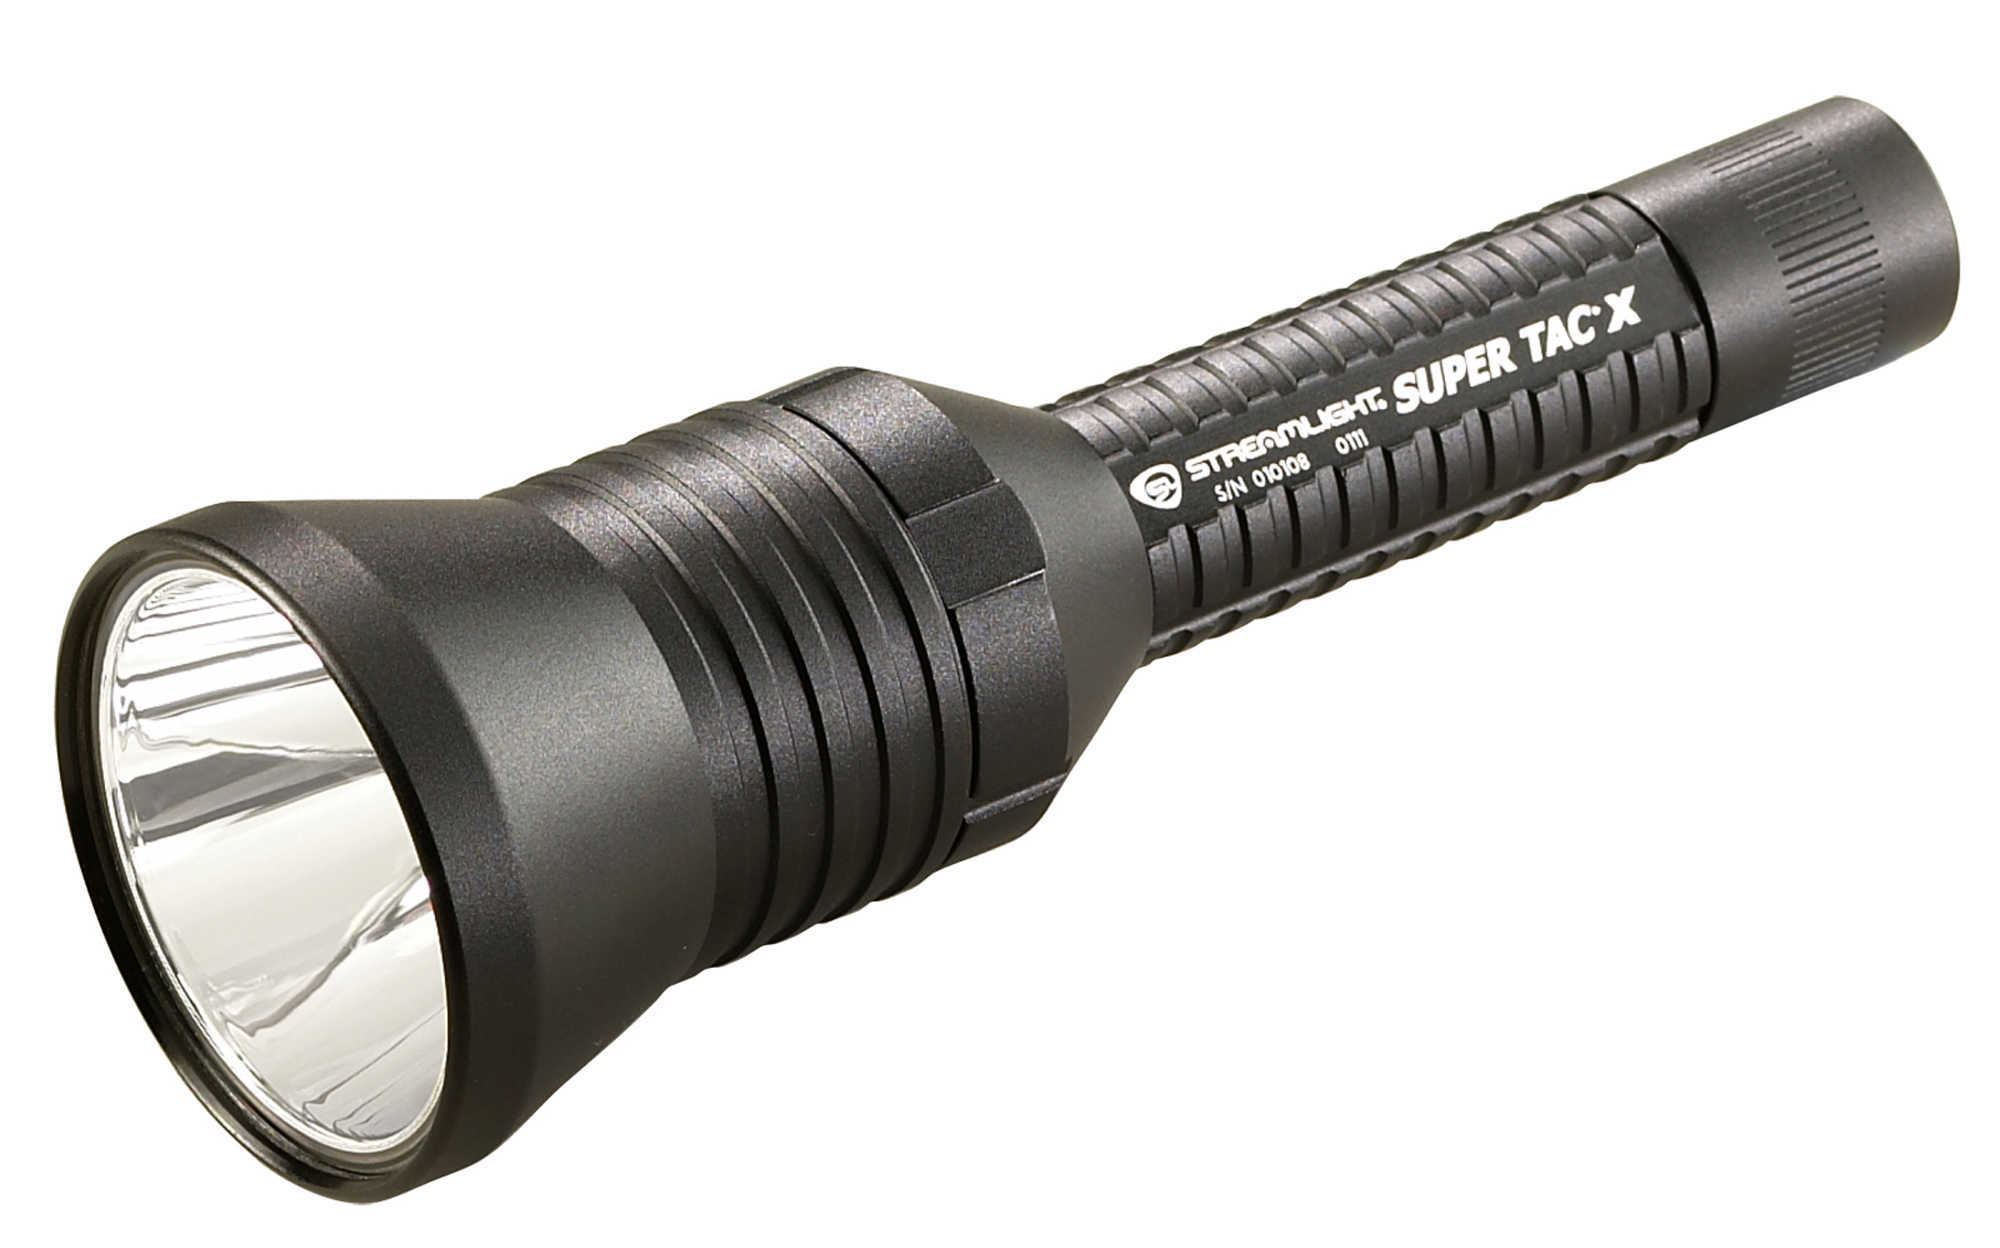 Streamlight Super TAC X With Holster